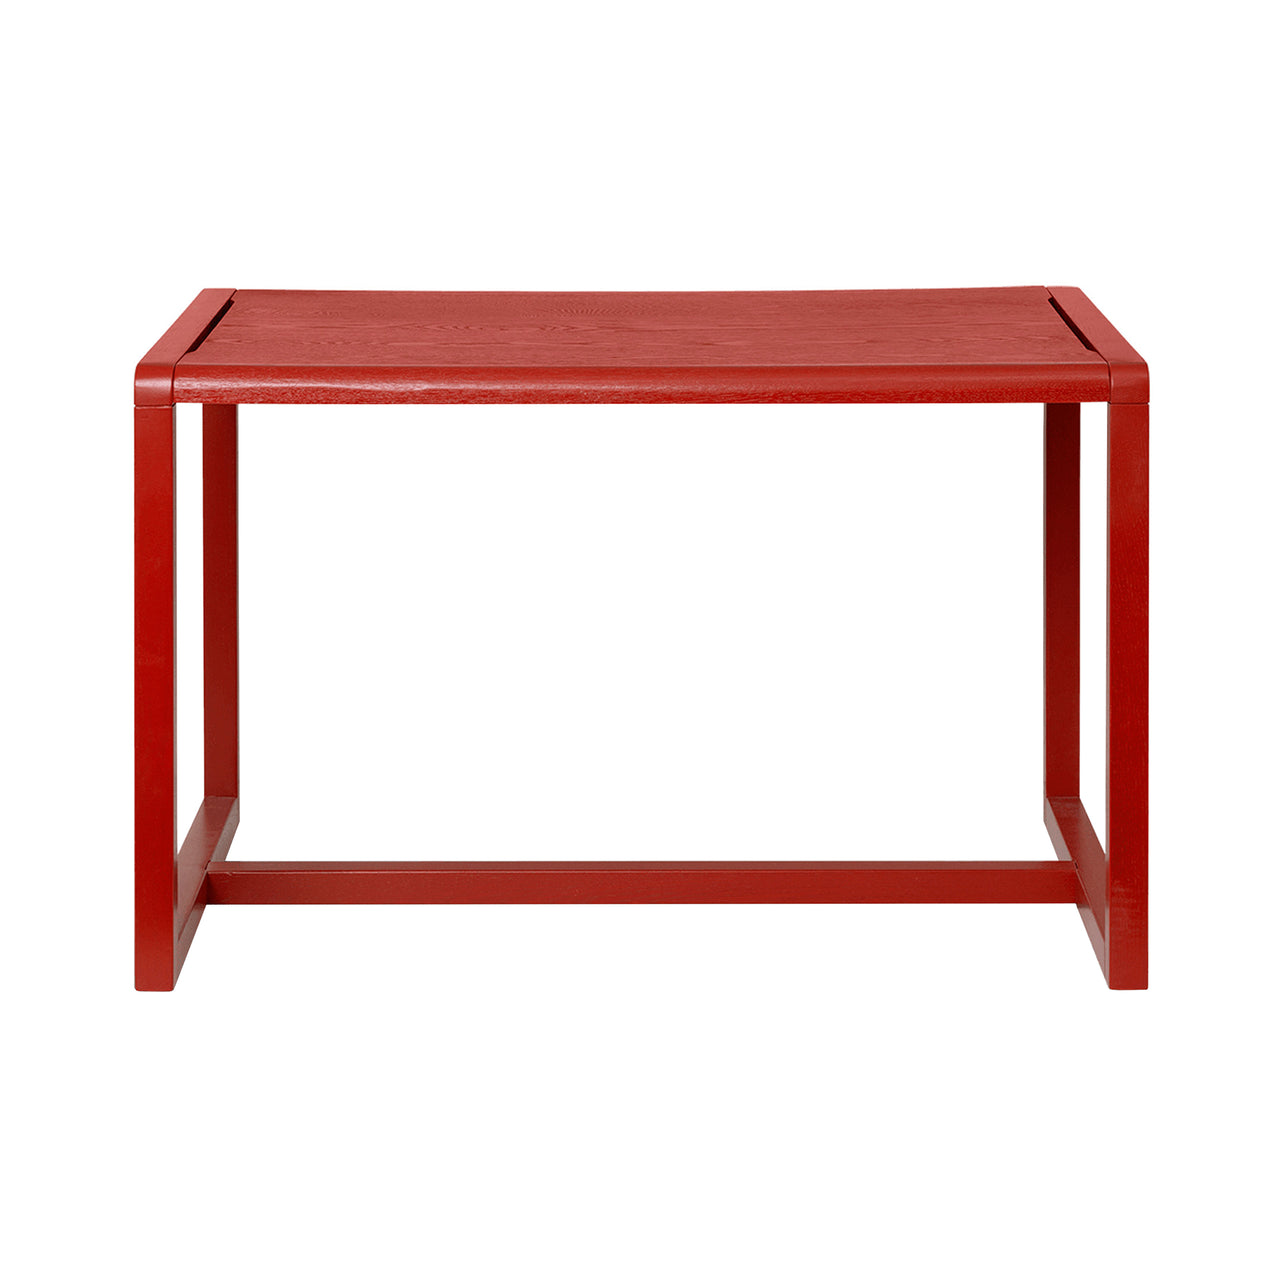 Little Architect Table: Poppy Red